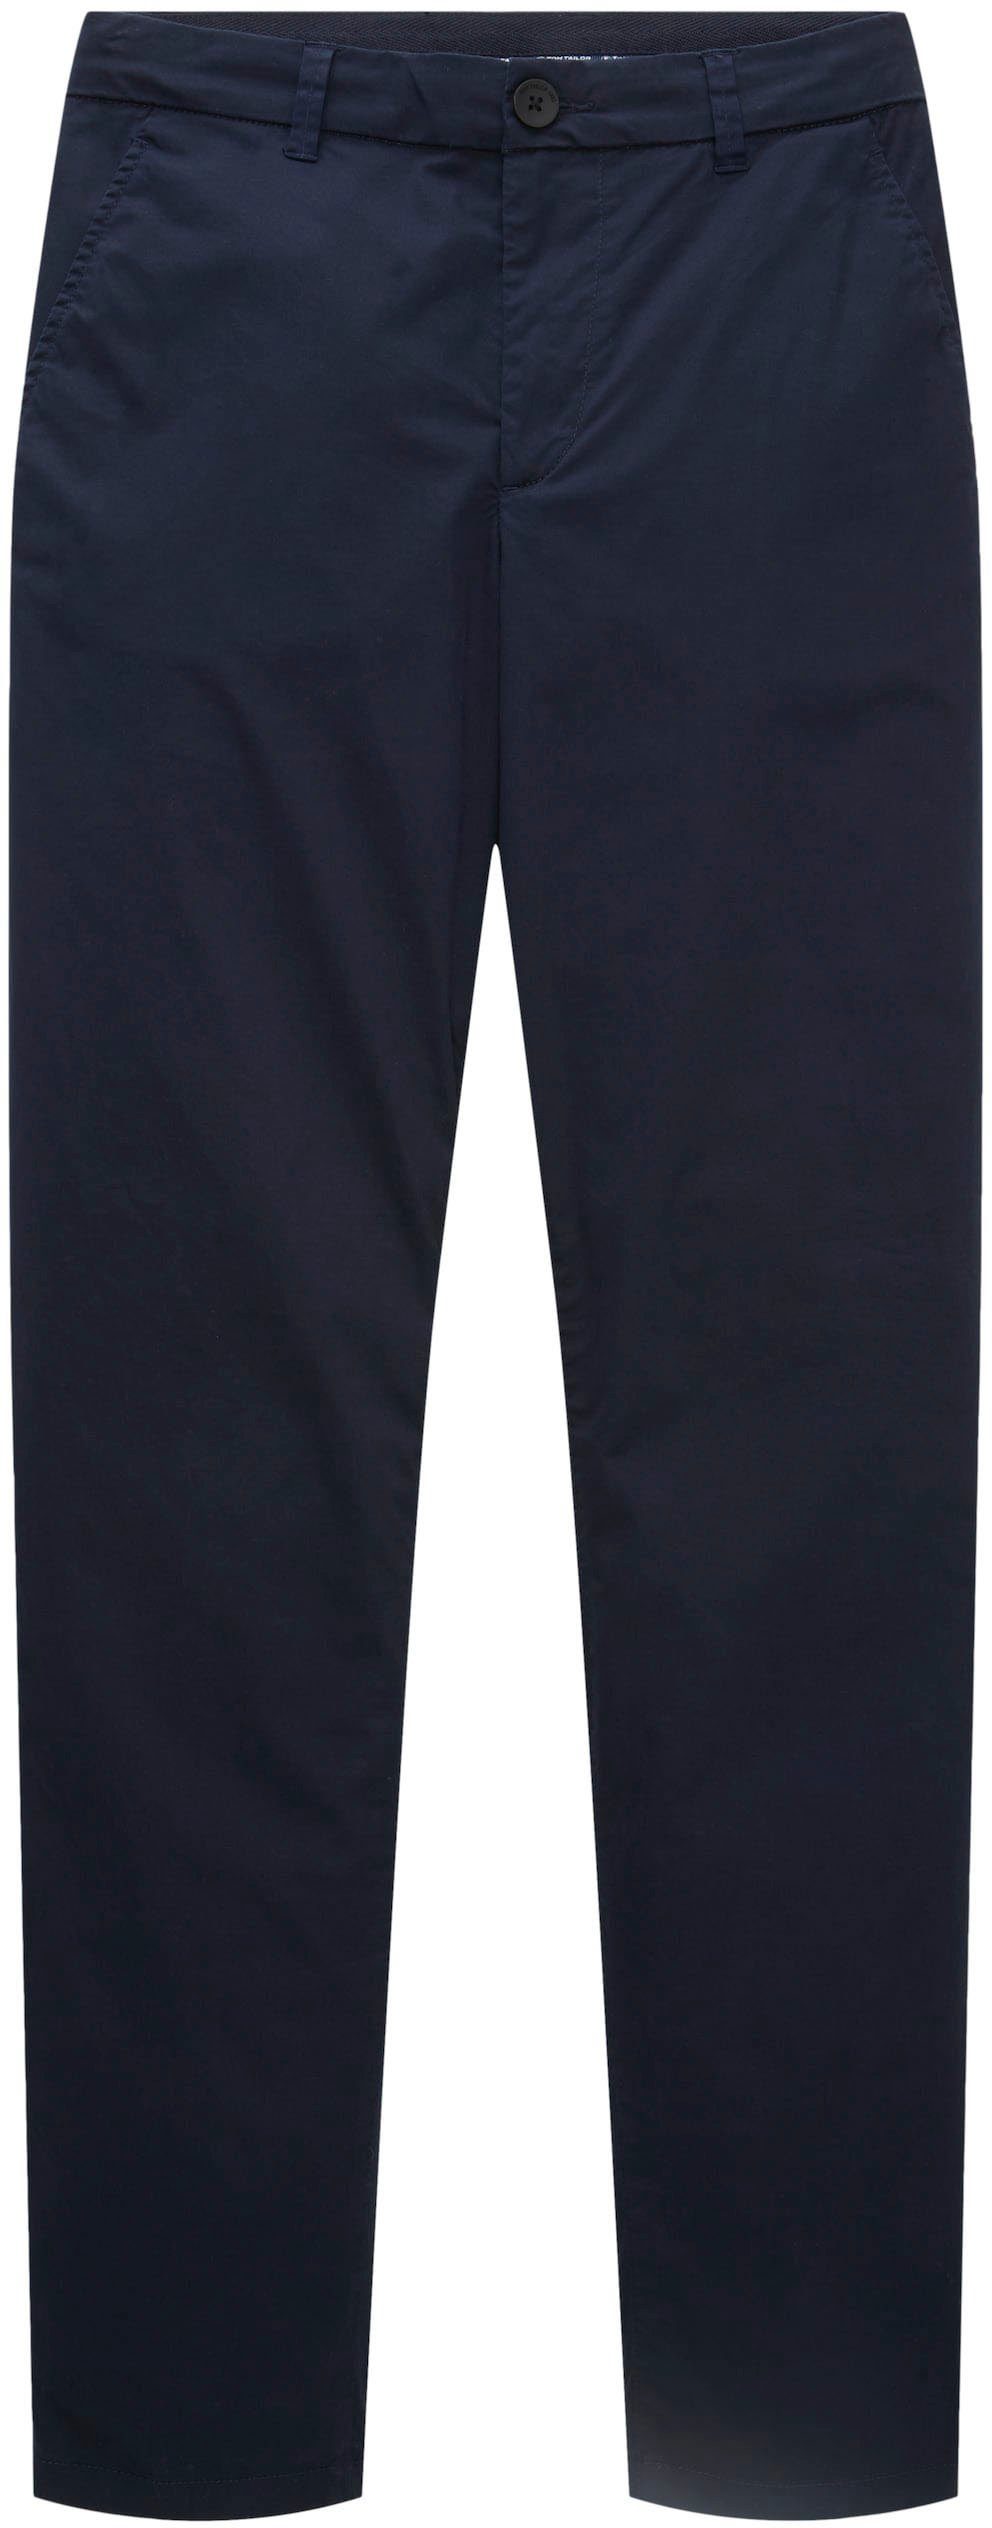 TOM TAILOR Chinohose Relaxed Tapered dunkelblau